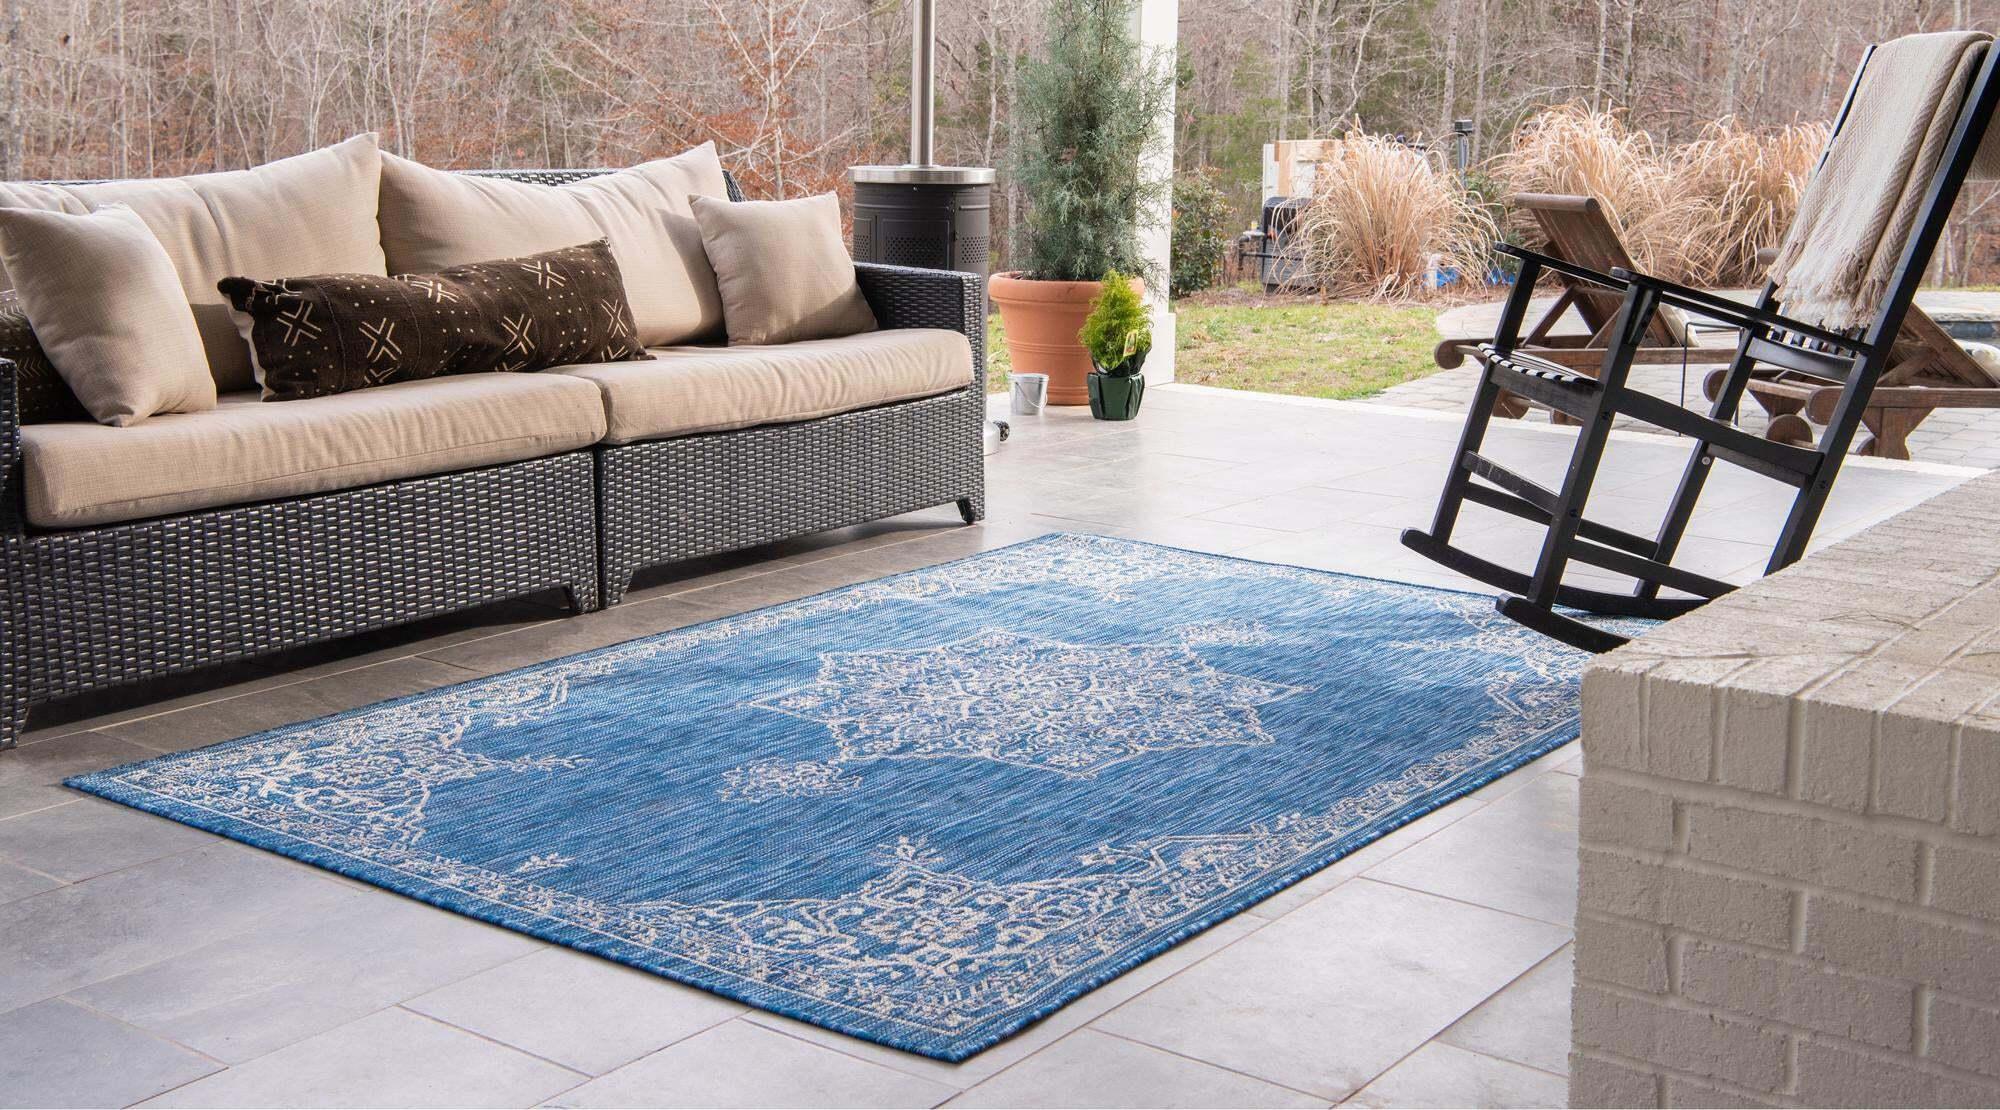 Unique Loom Outdoor Rugs - Outdoor Traditional Medallion Rectangular 8x11 Rug Blue & Ivory